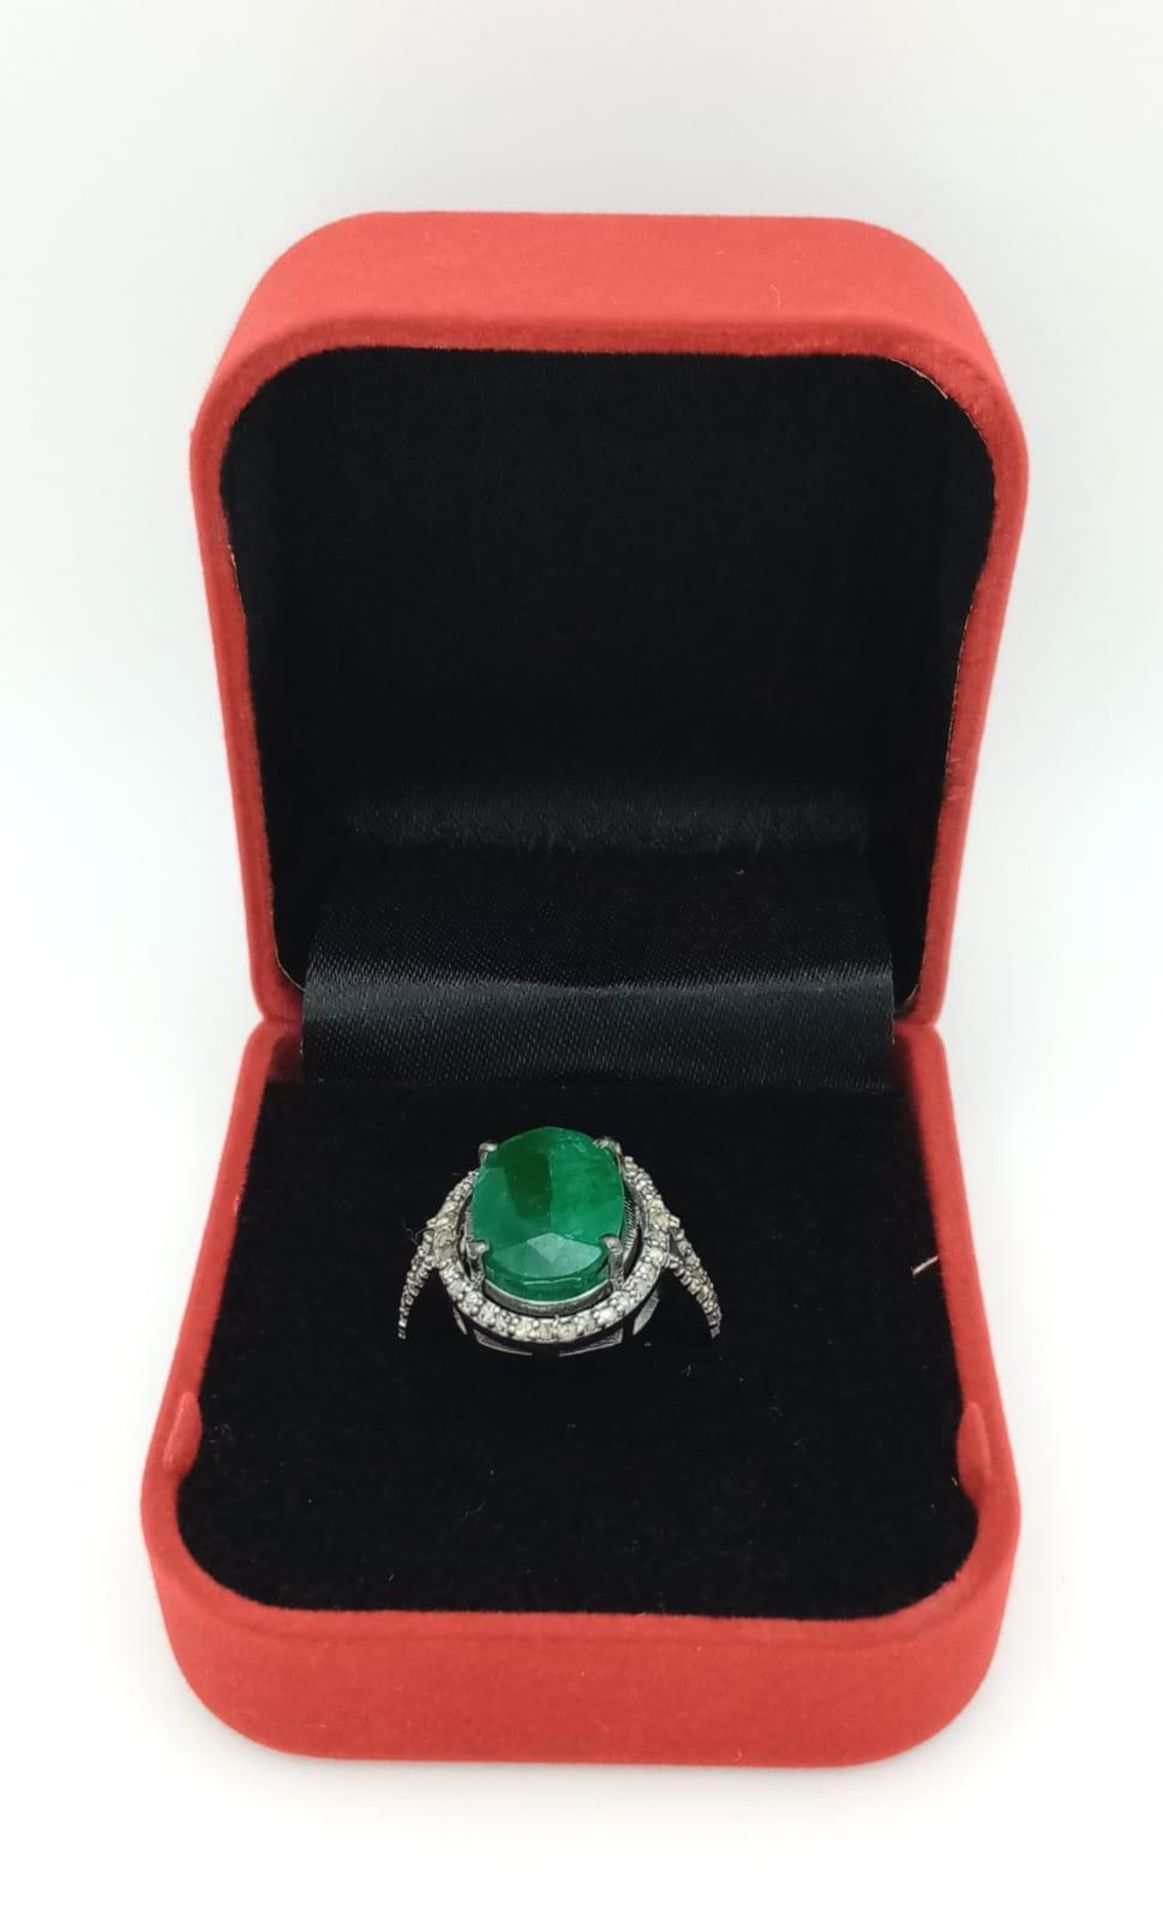 An Emerald Ring with a Halo of Diamonds on 925 Silver. 7.55ct emerald, 0.67ctw diamonds. Size N, 4. - Image 4 of 6